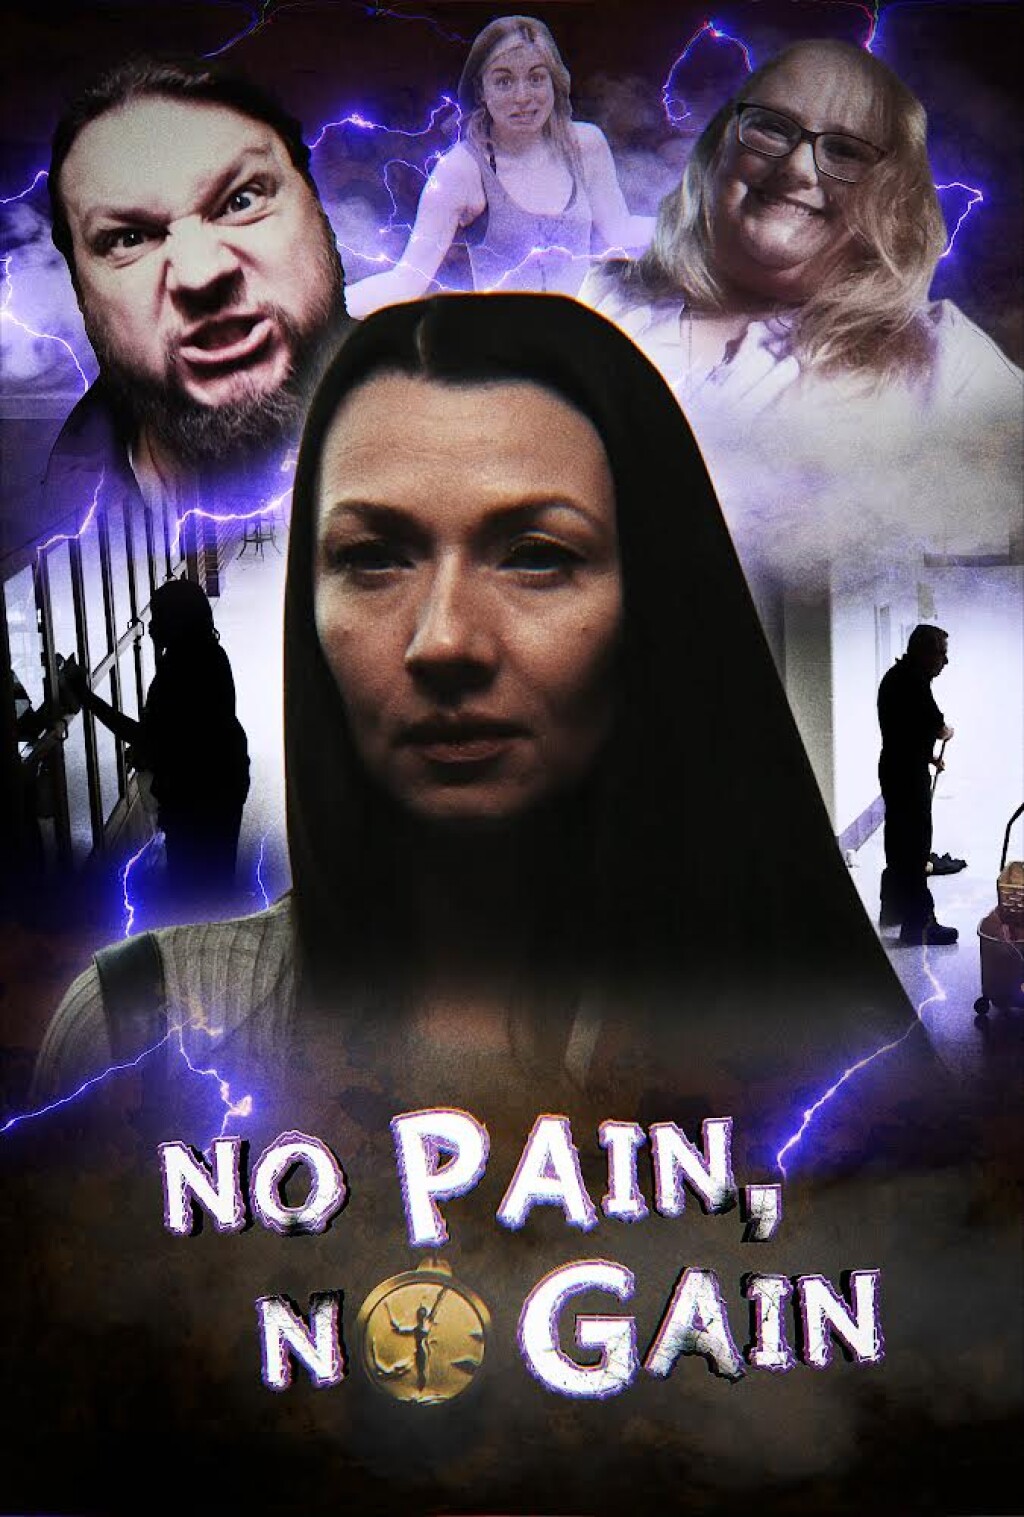 Filmposter for No Pain, No Gain